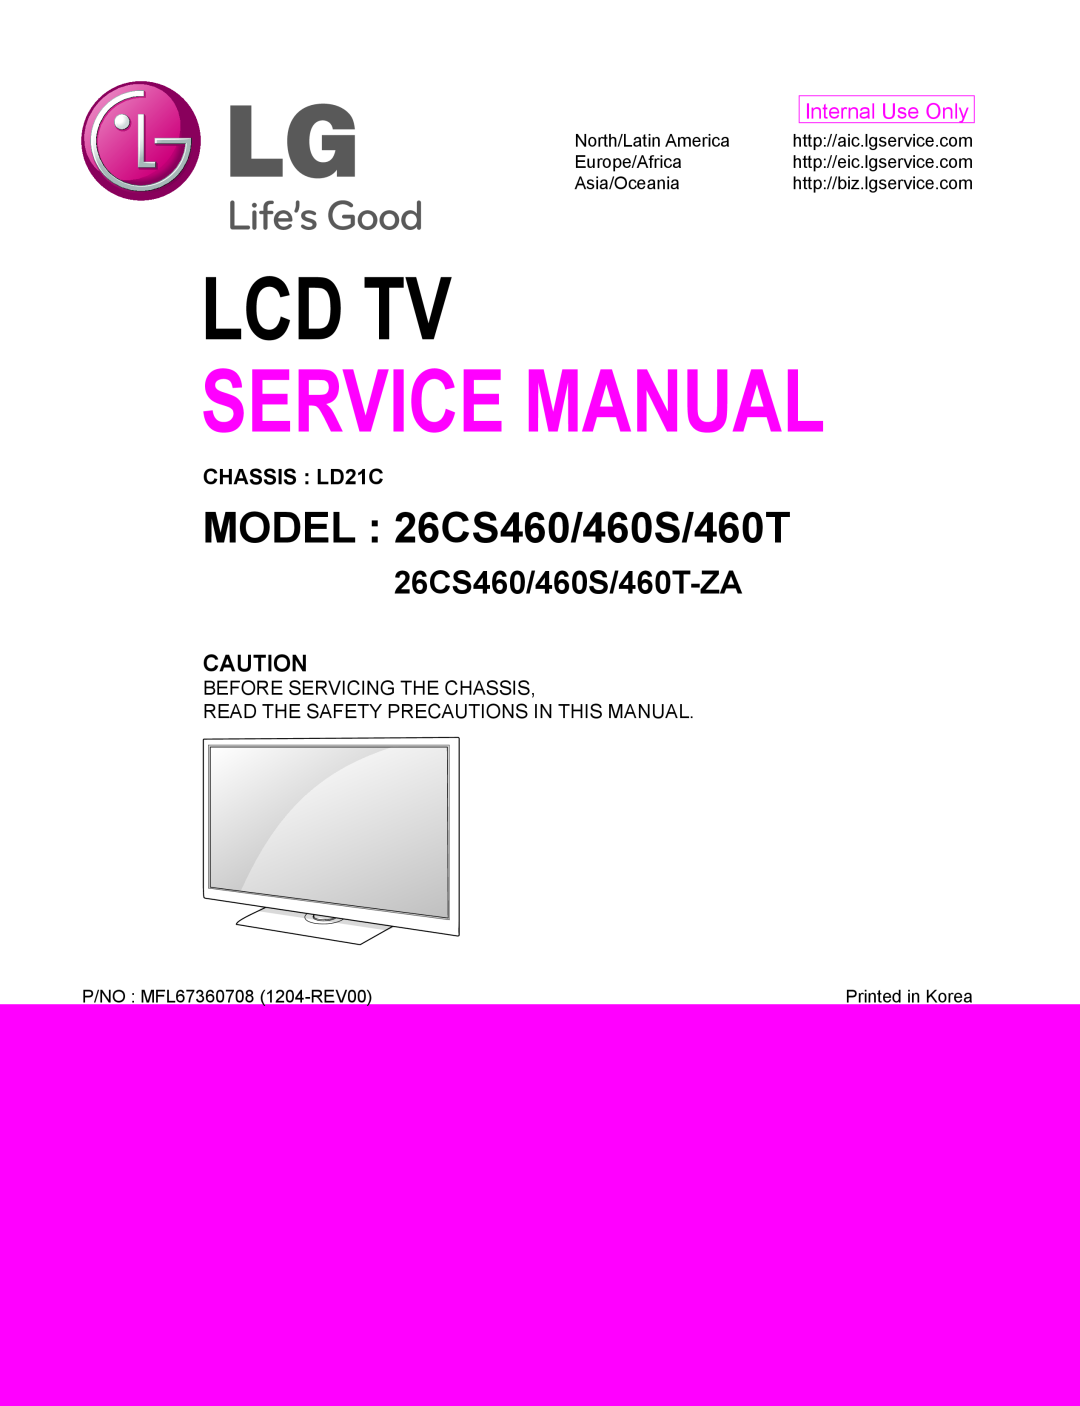 LG Electronics 26CS460T service manual CHASSIS LD21C, Lcd Tv, Service Manual, MODEL 26CS460/460S/460T, Internal Use Only 